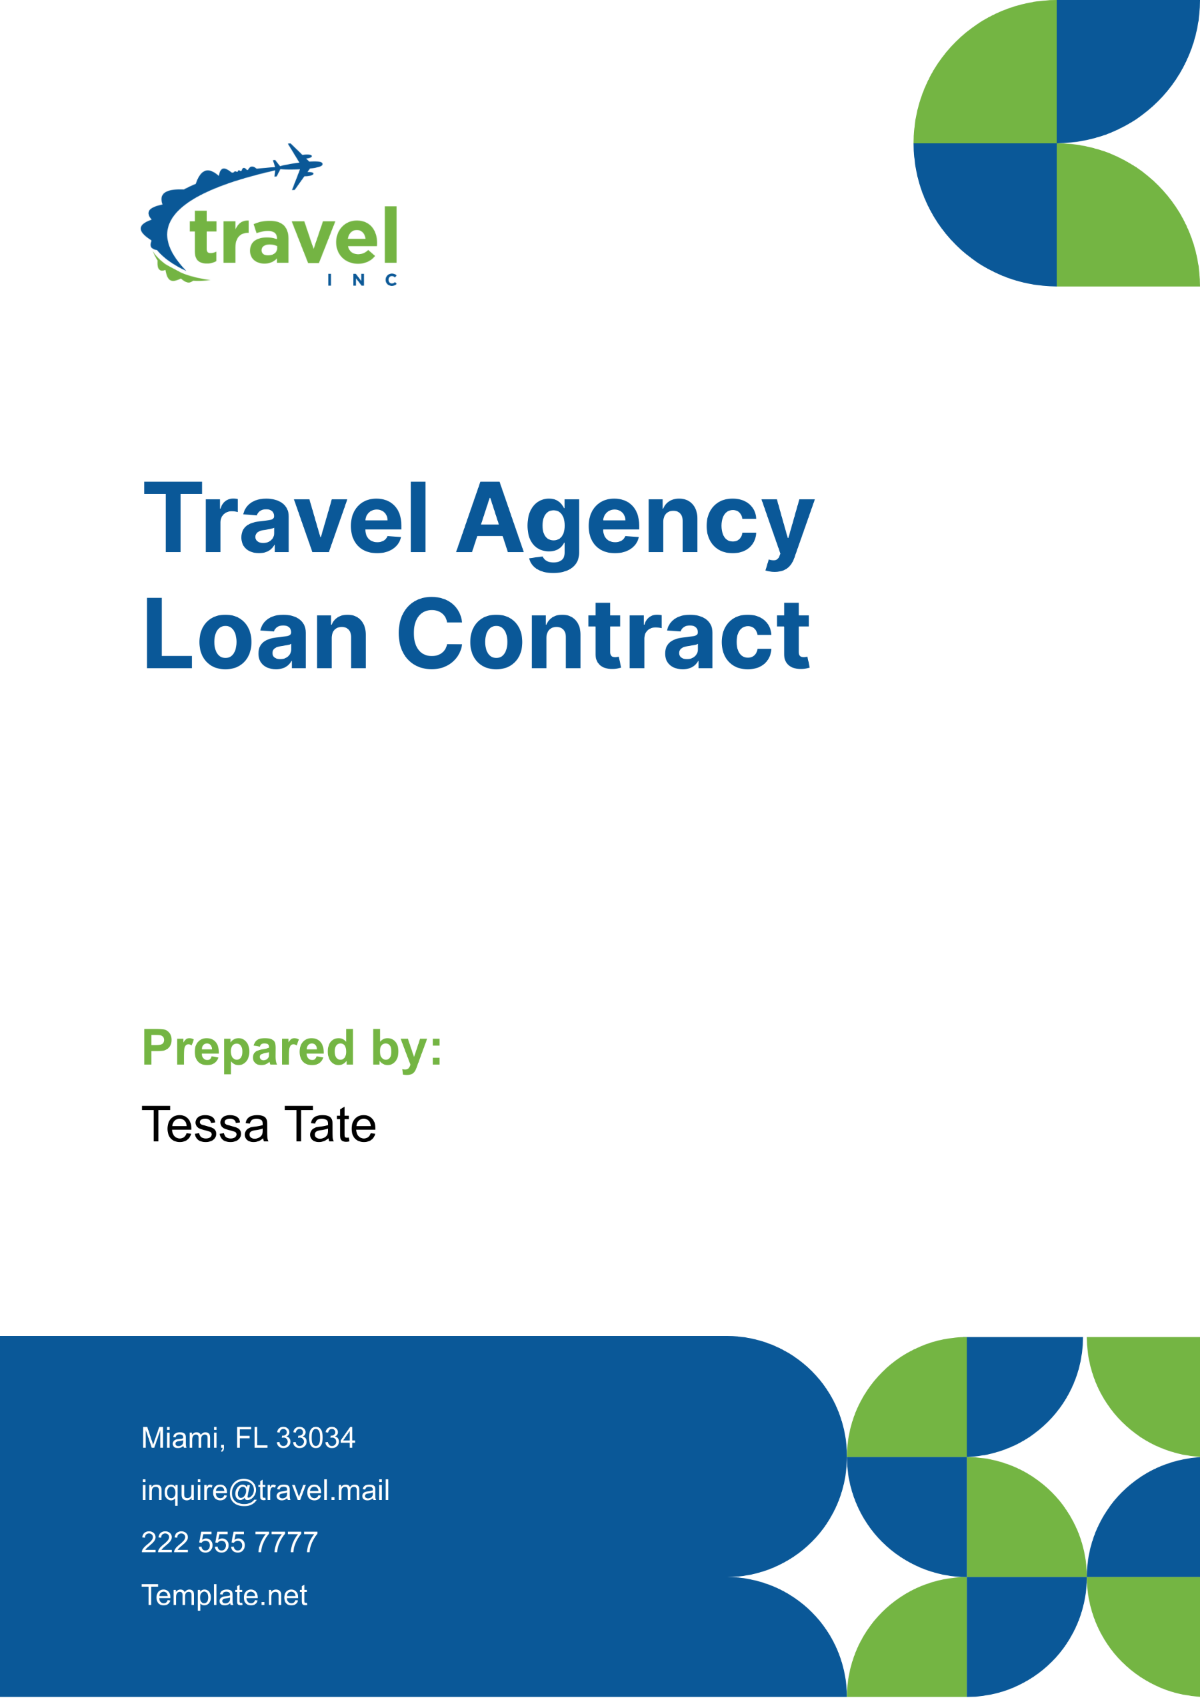 Travel Agency Loan Contract Template